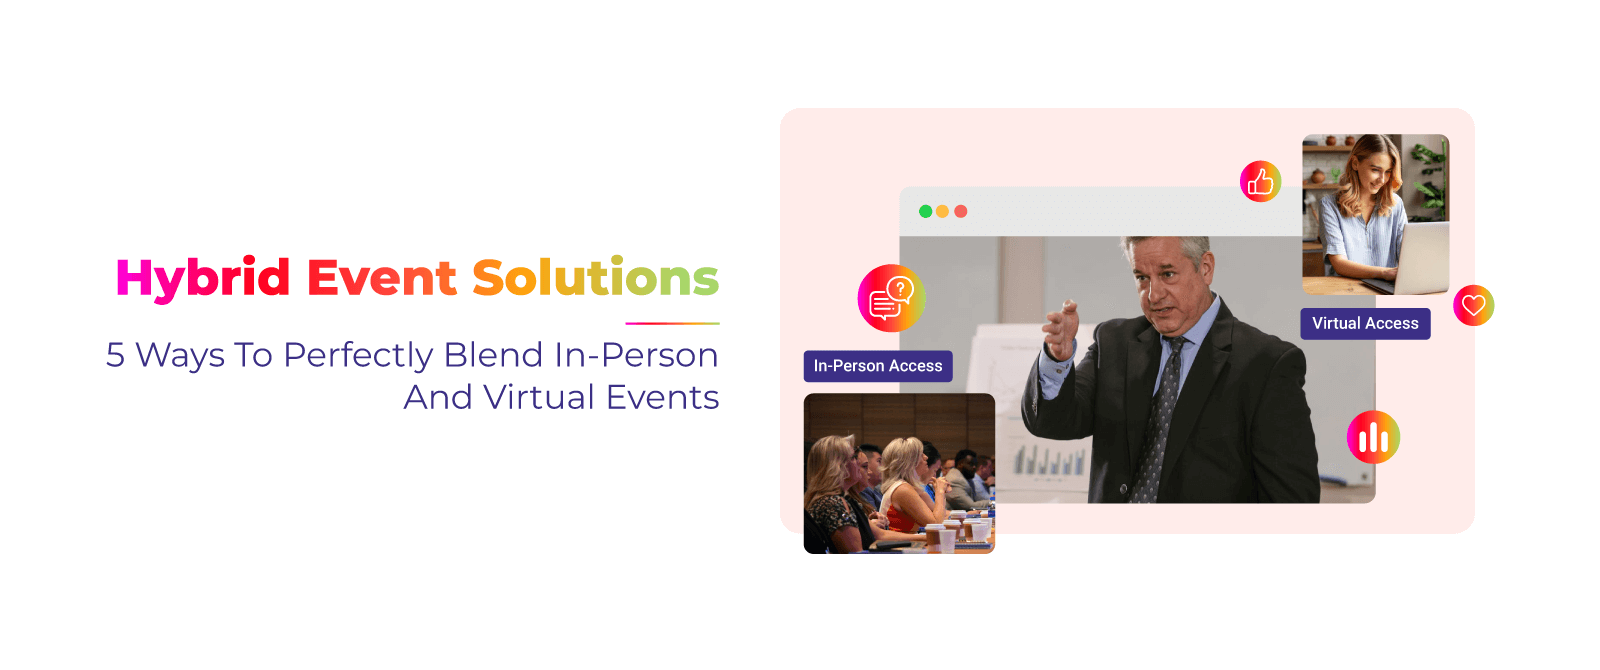 Hybrid Event Solutions: 5 Ways to Perfectly Blend In-Person and Virtual Events